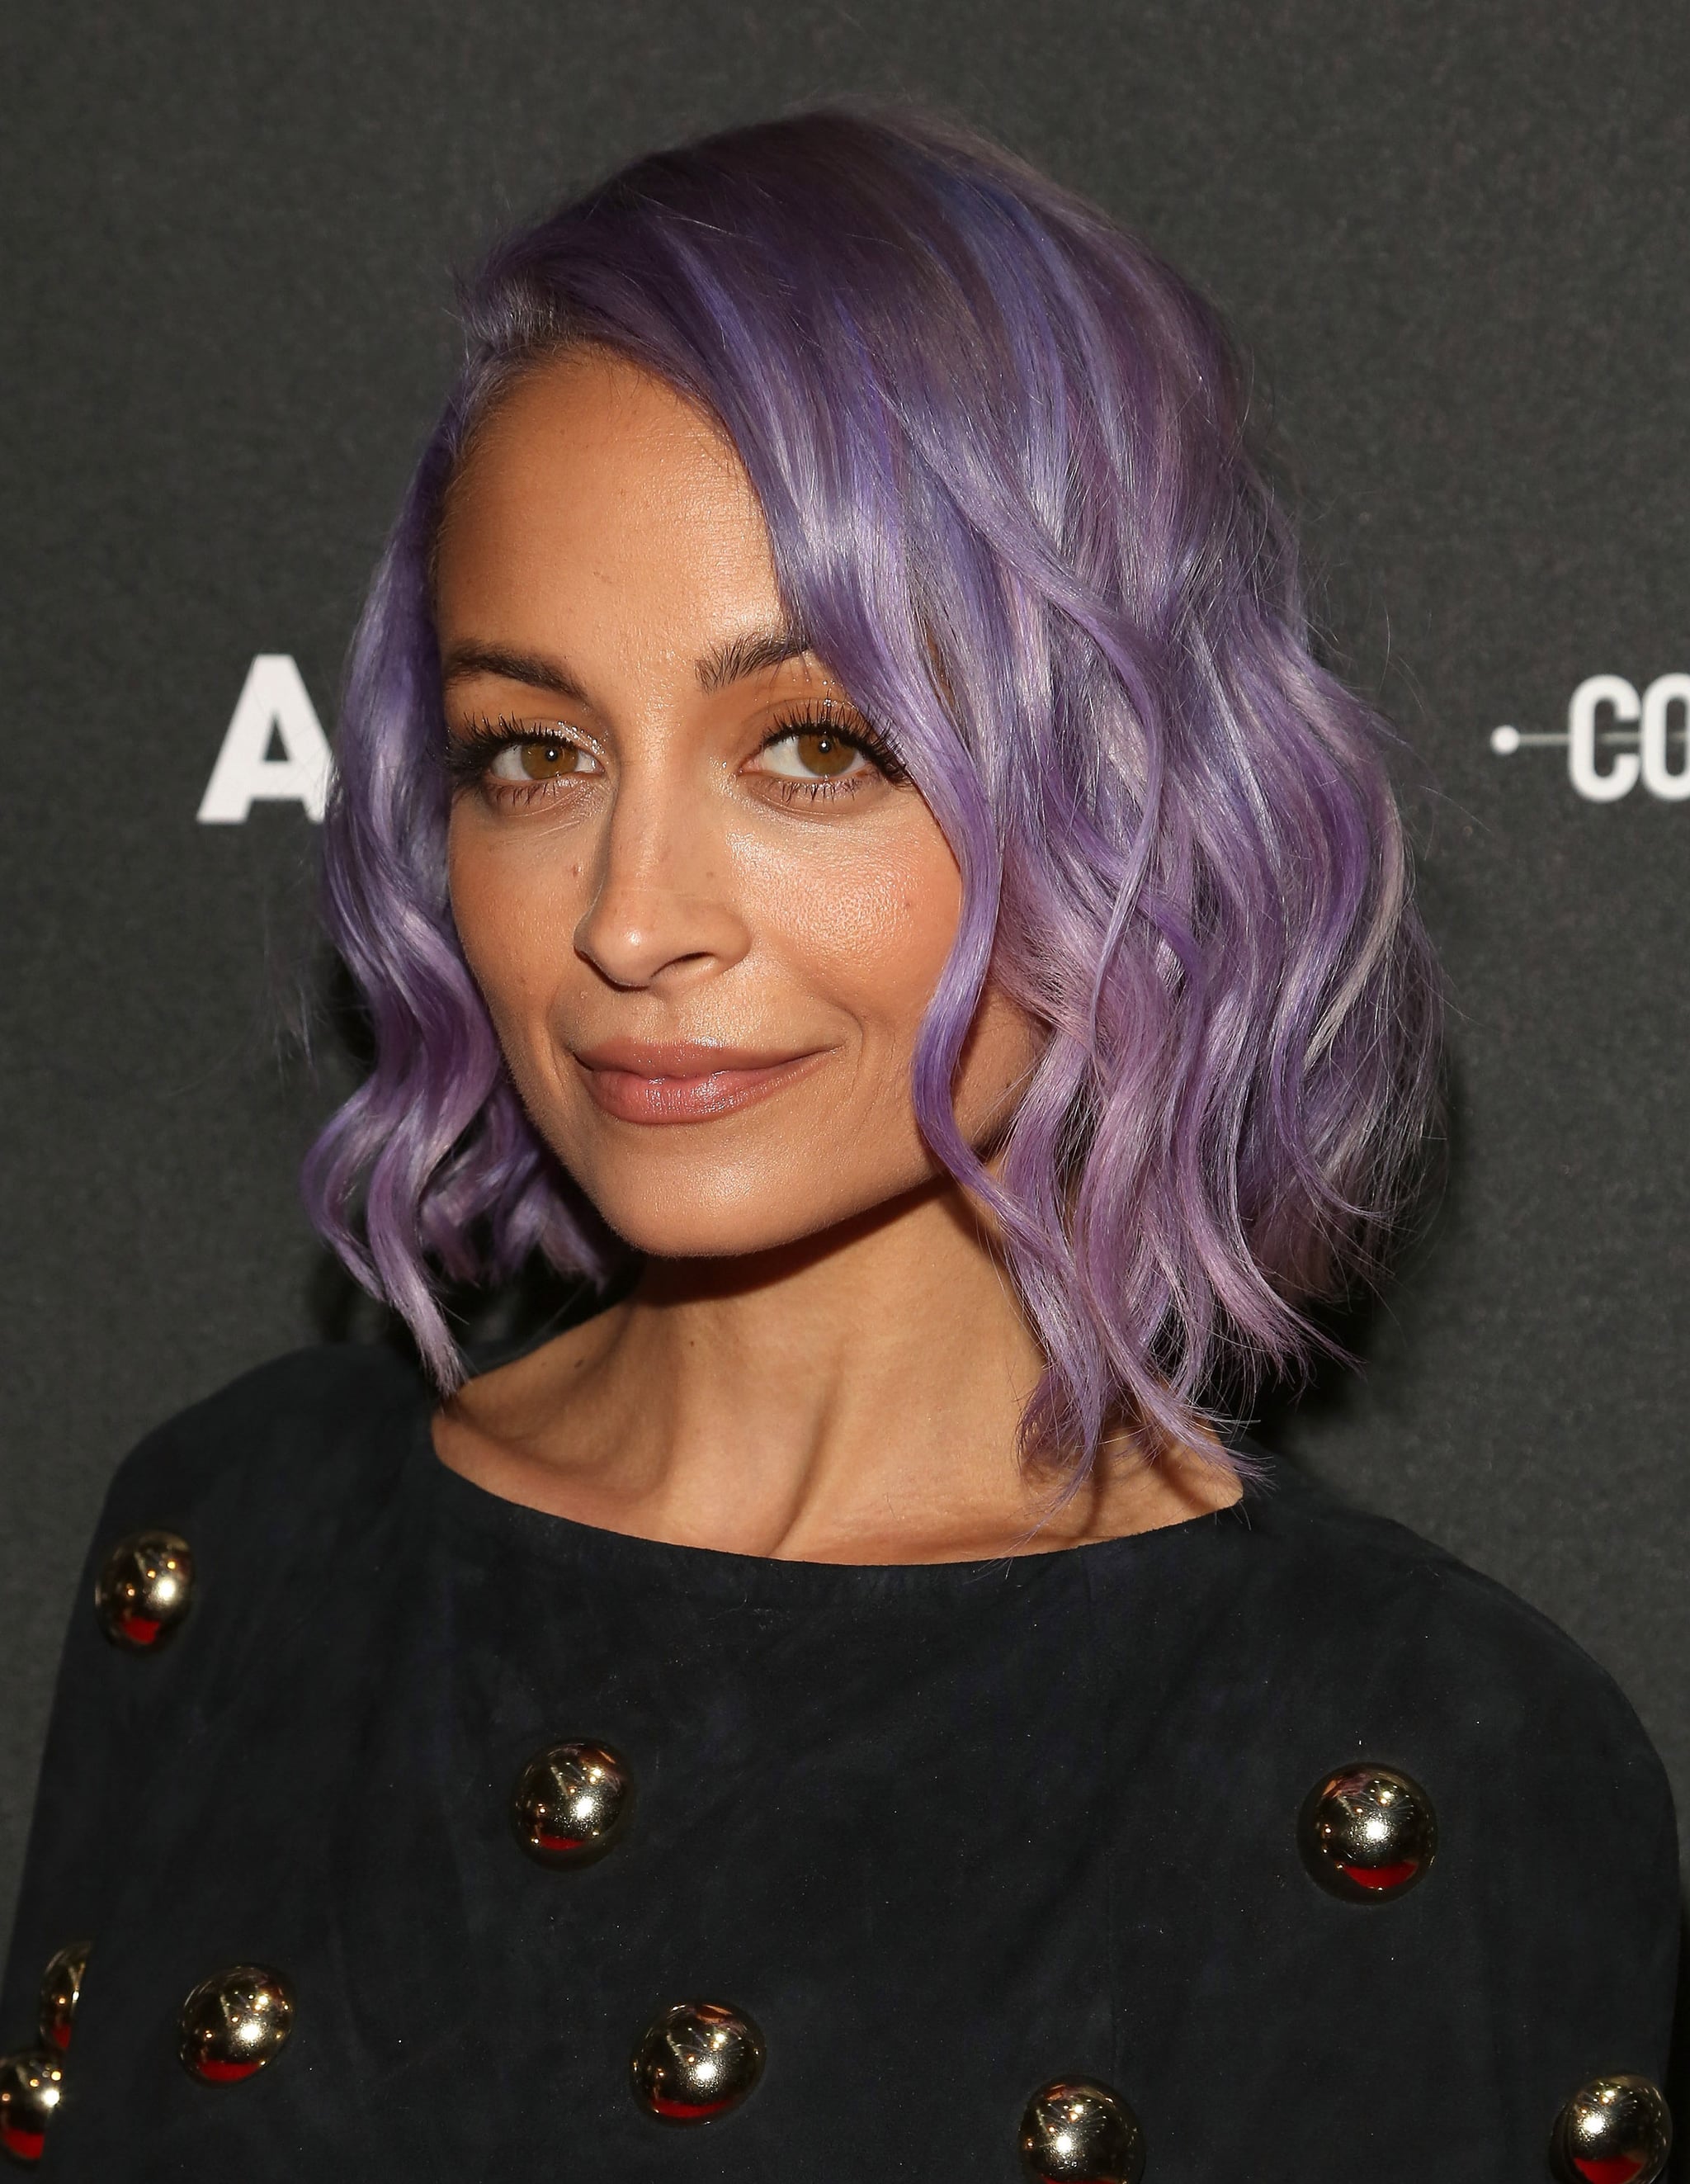 Nicole Richie | The Wob (Wavy Lob!) Is the Hot New Hollywood Hairstyle |  POPSUGAR Beauty Photo 9